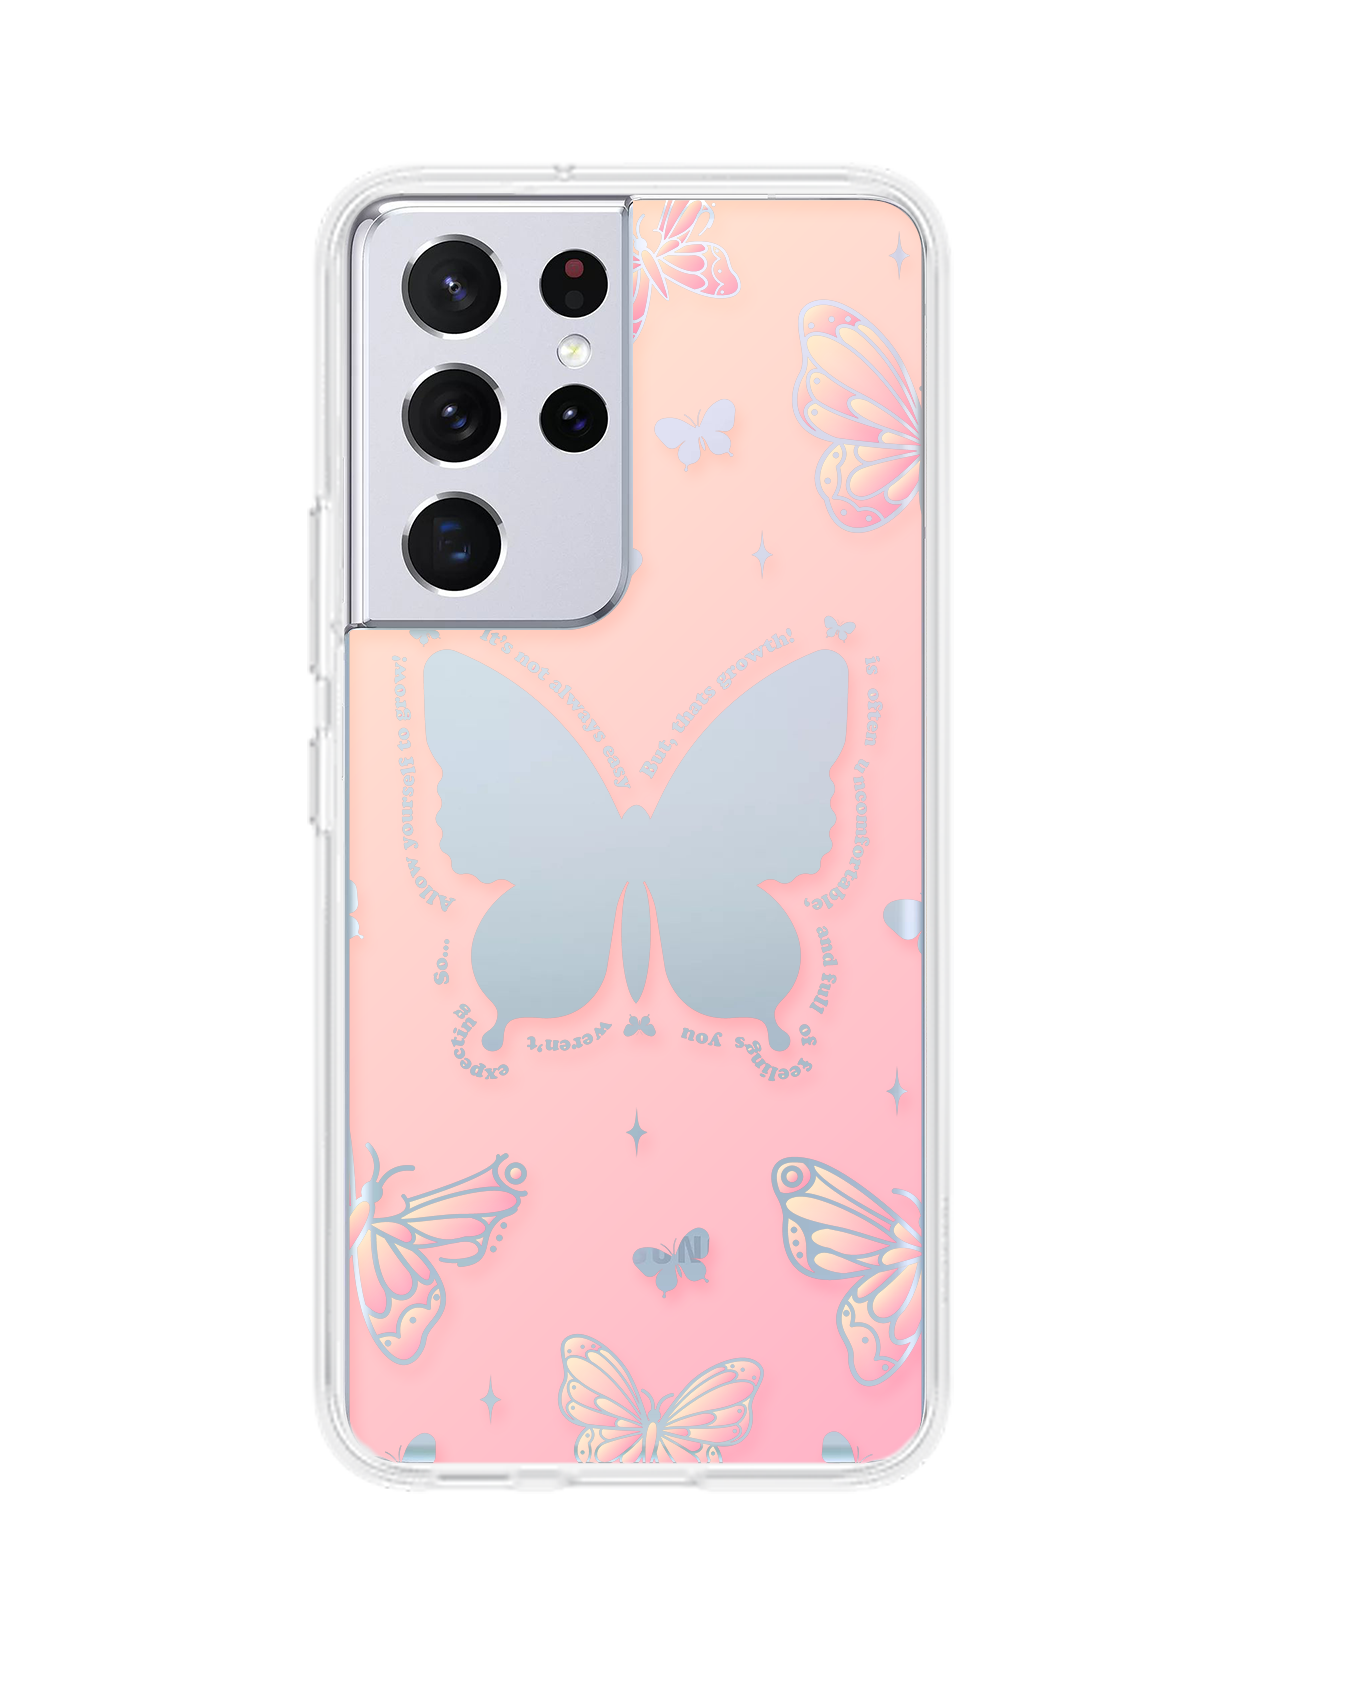 Android Rearguard Hybrid Case - Butterfly Effect 1.0